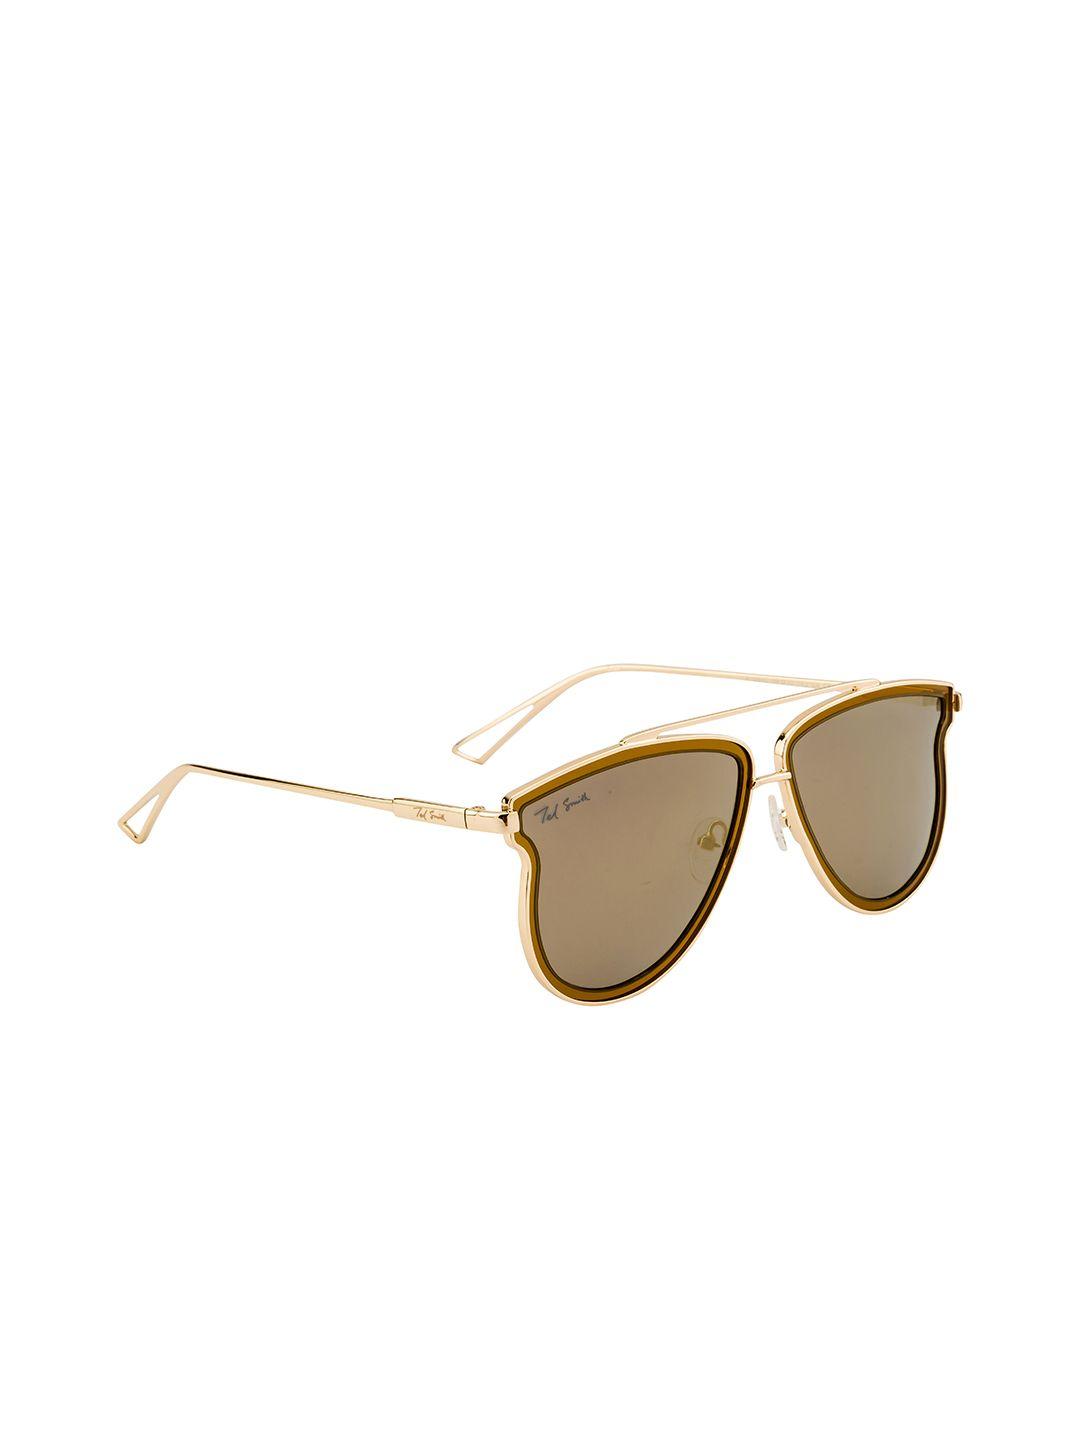 ted smith unisex brown lens & gold-toned polarised other sunglasses ts-jp0890_c6-gold